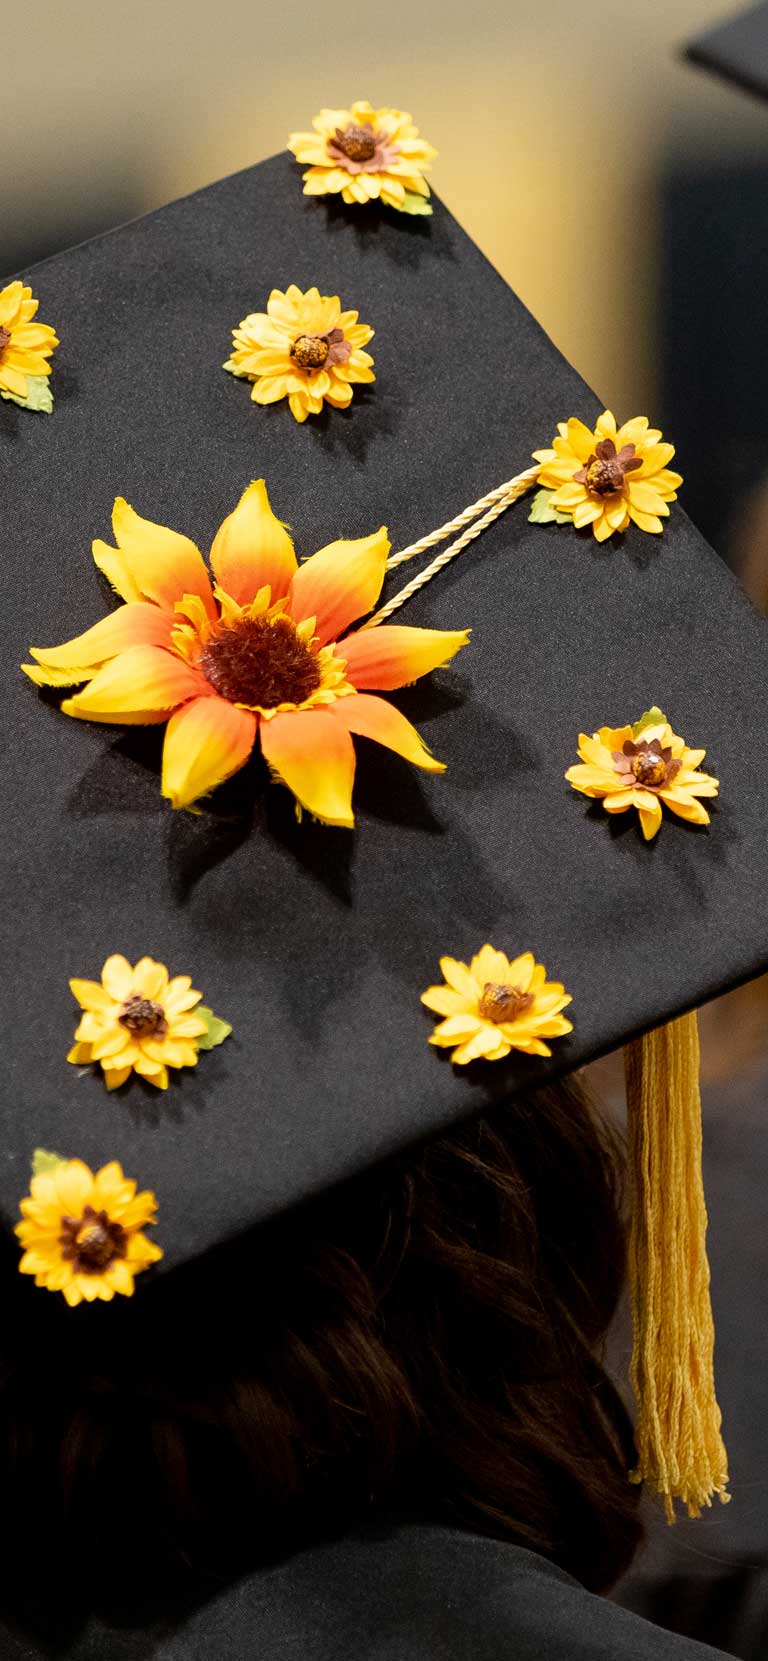 Photos of graduate hat decorated with flowers